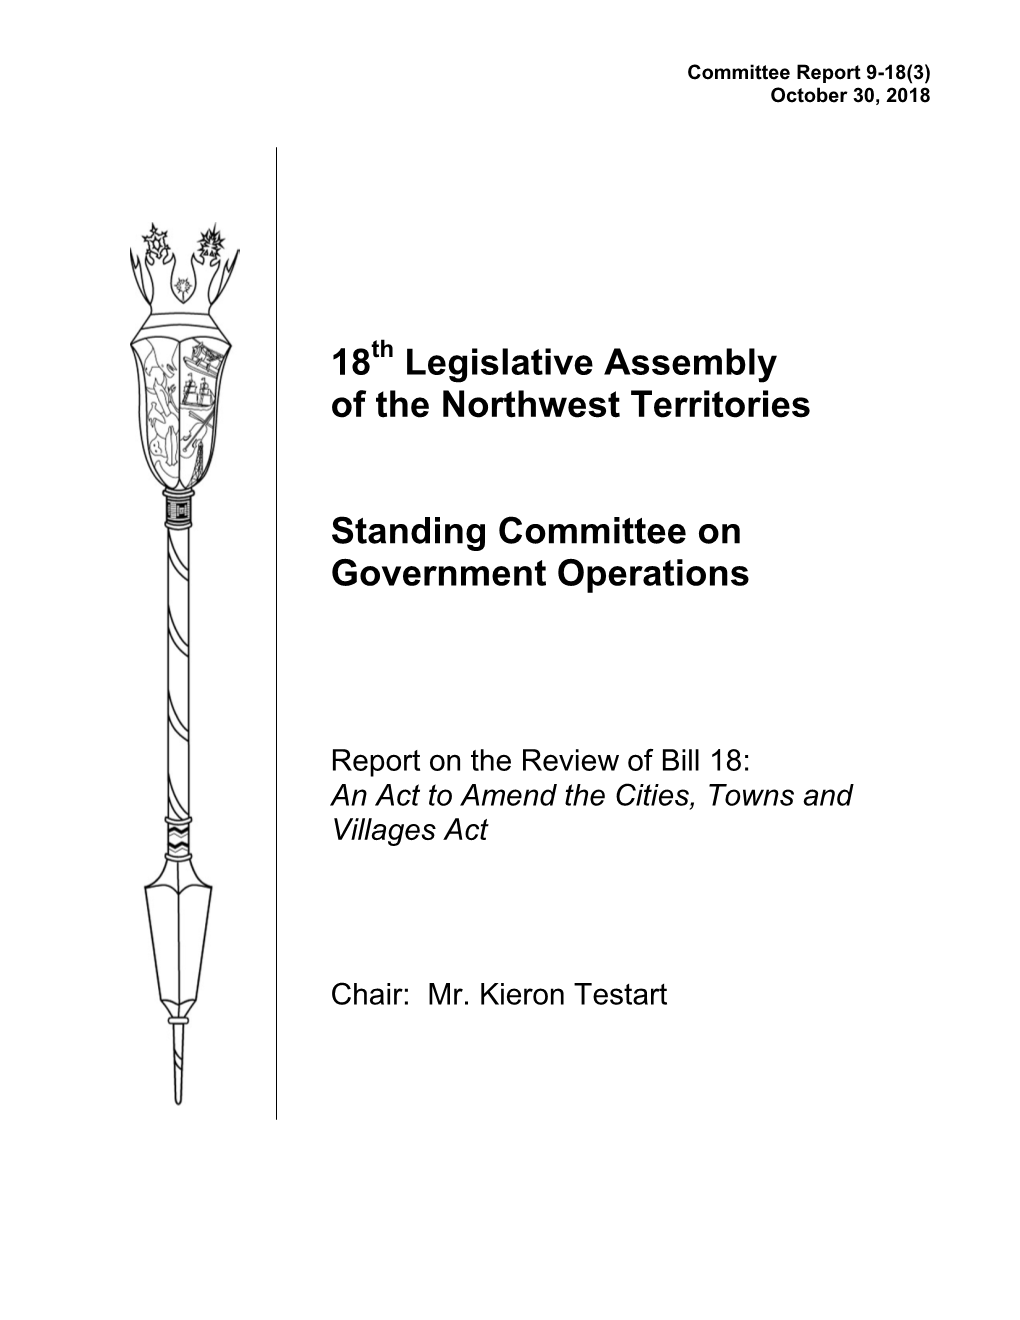 Report on the Review of Bill 18: an Act to Amend the Cities, Towns and Villages Act